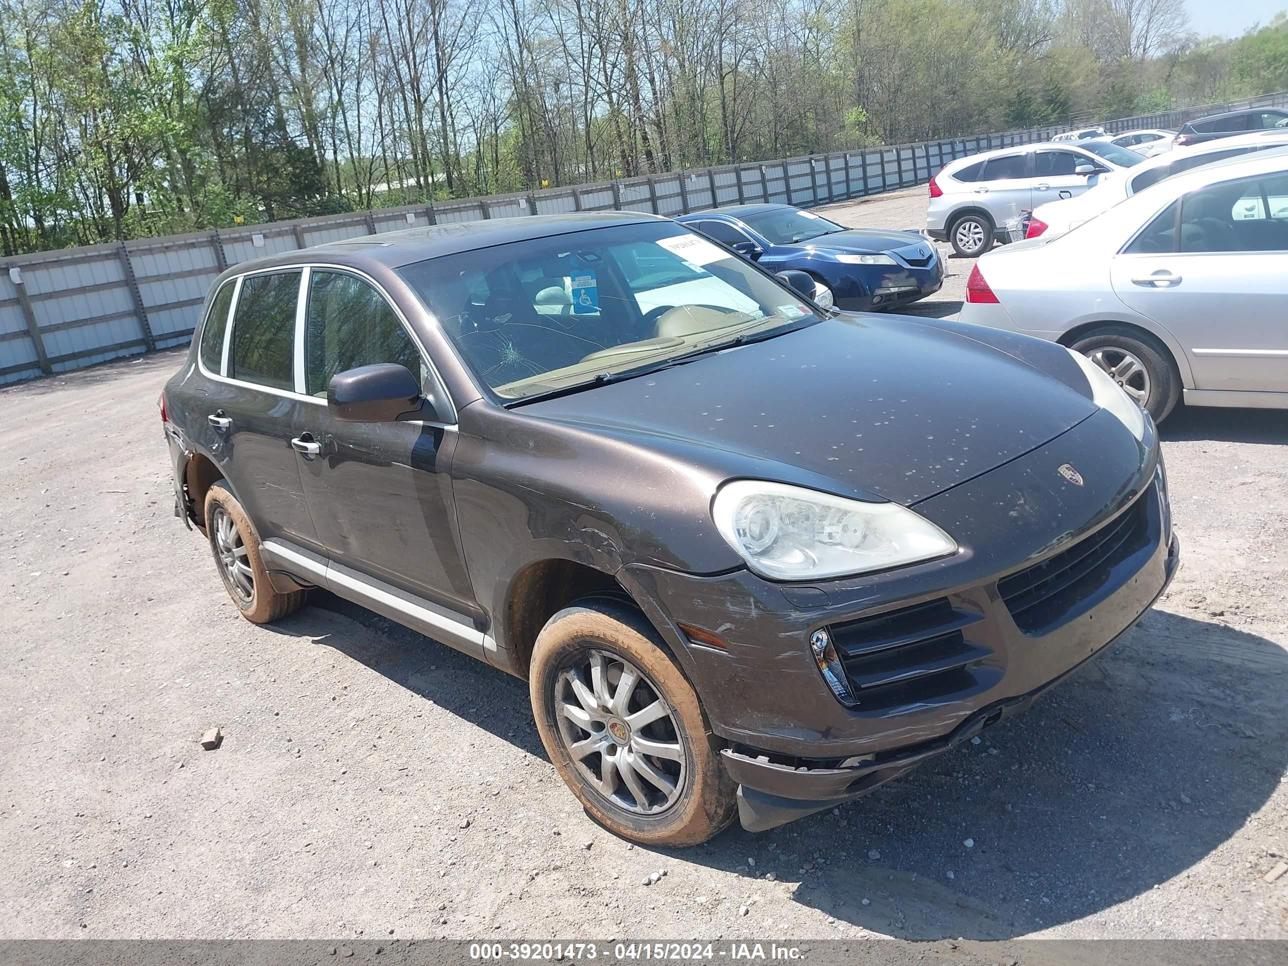 vin: WP1AA29P49LA05032 WP1AA29P49LA05032 2009 porsche cayenne 3600 for Sale in 37914, 3634 E. Governor John Sevier Hwy, Knoxville, Tennessee, USA